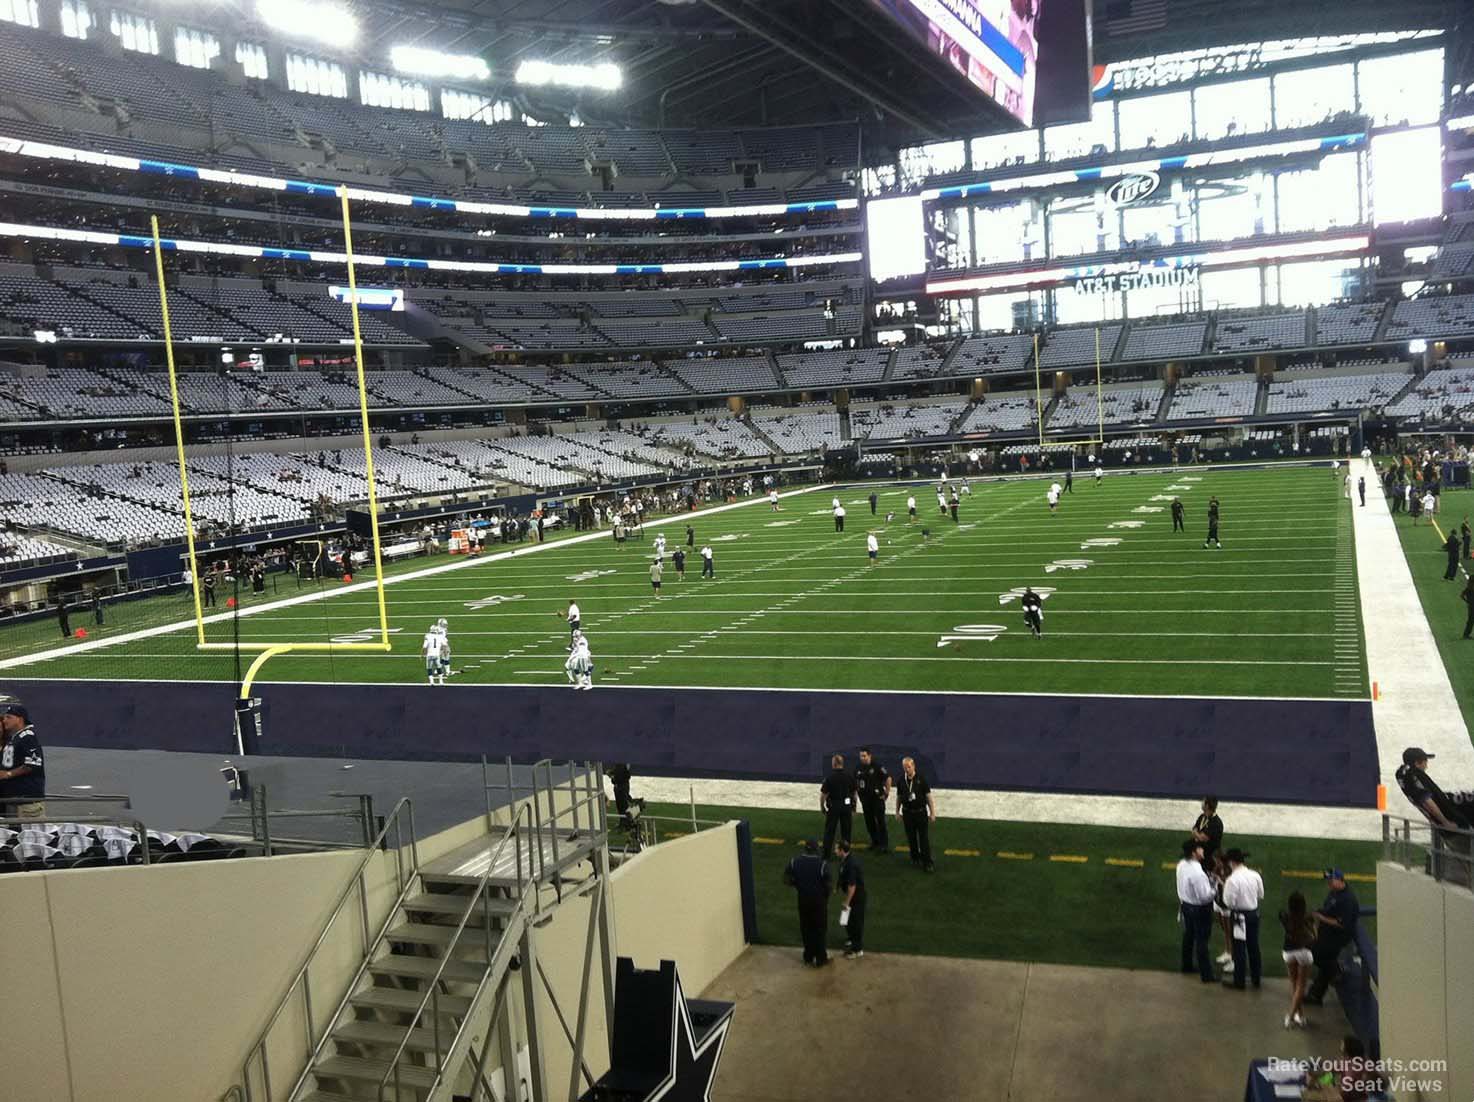 section 146, row 20 seat view  for football - at&t stadium (cowboys stadium)